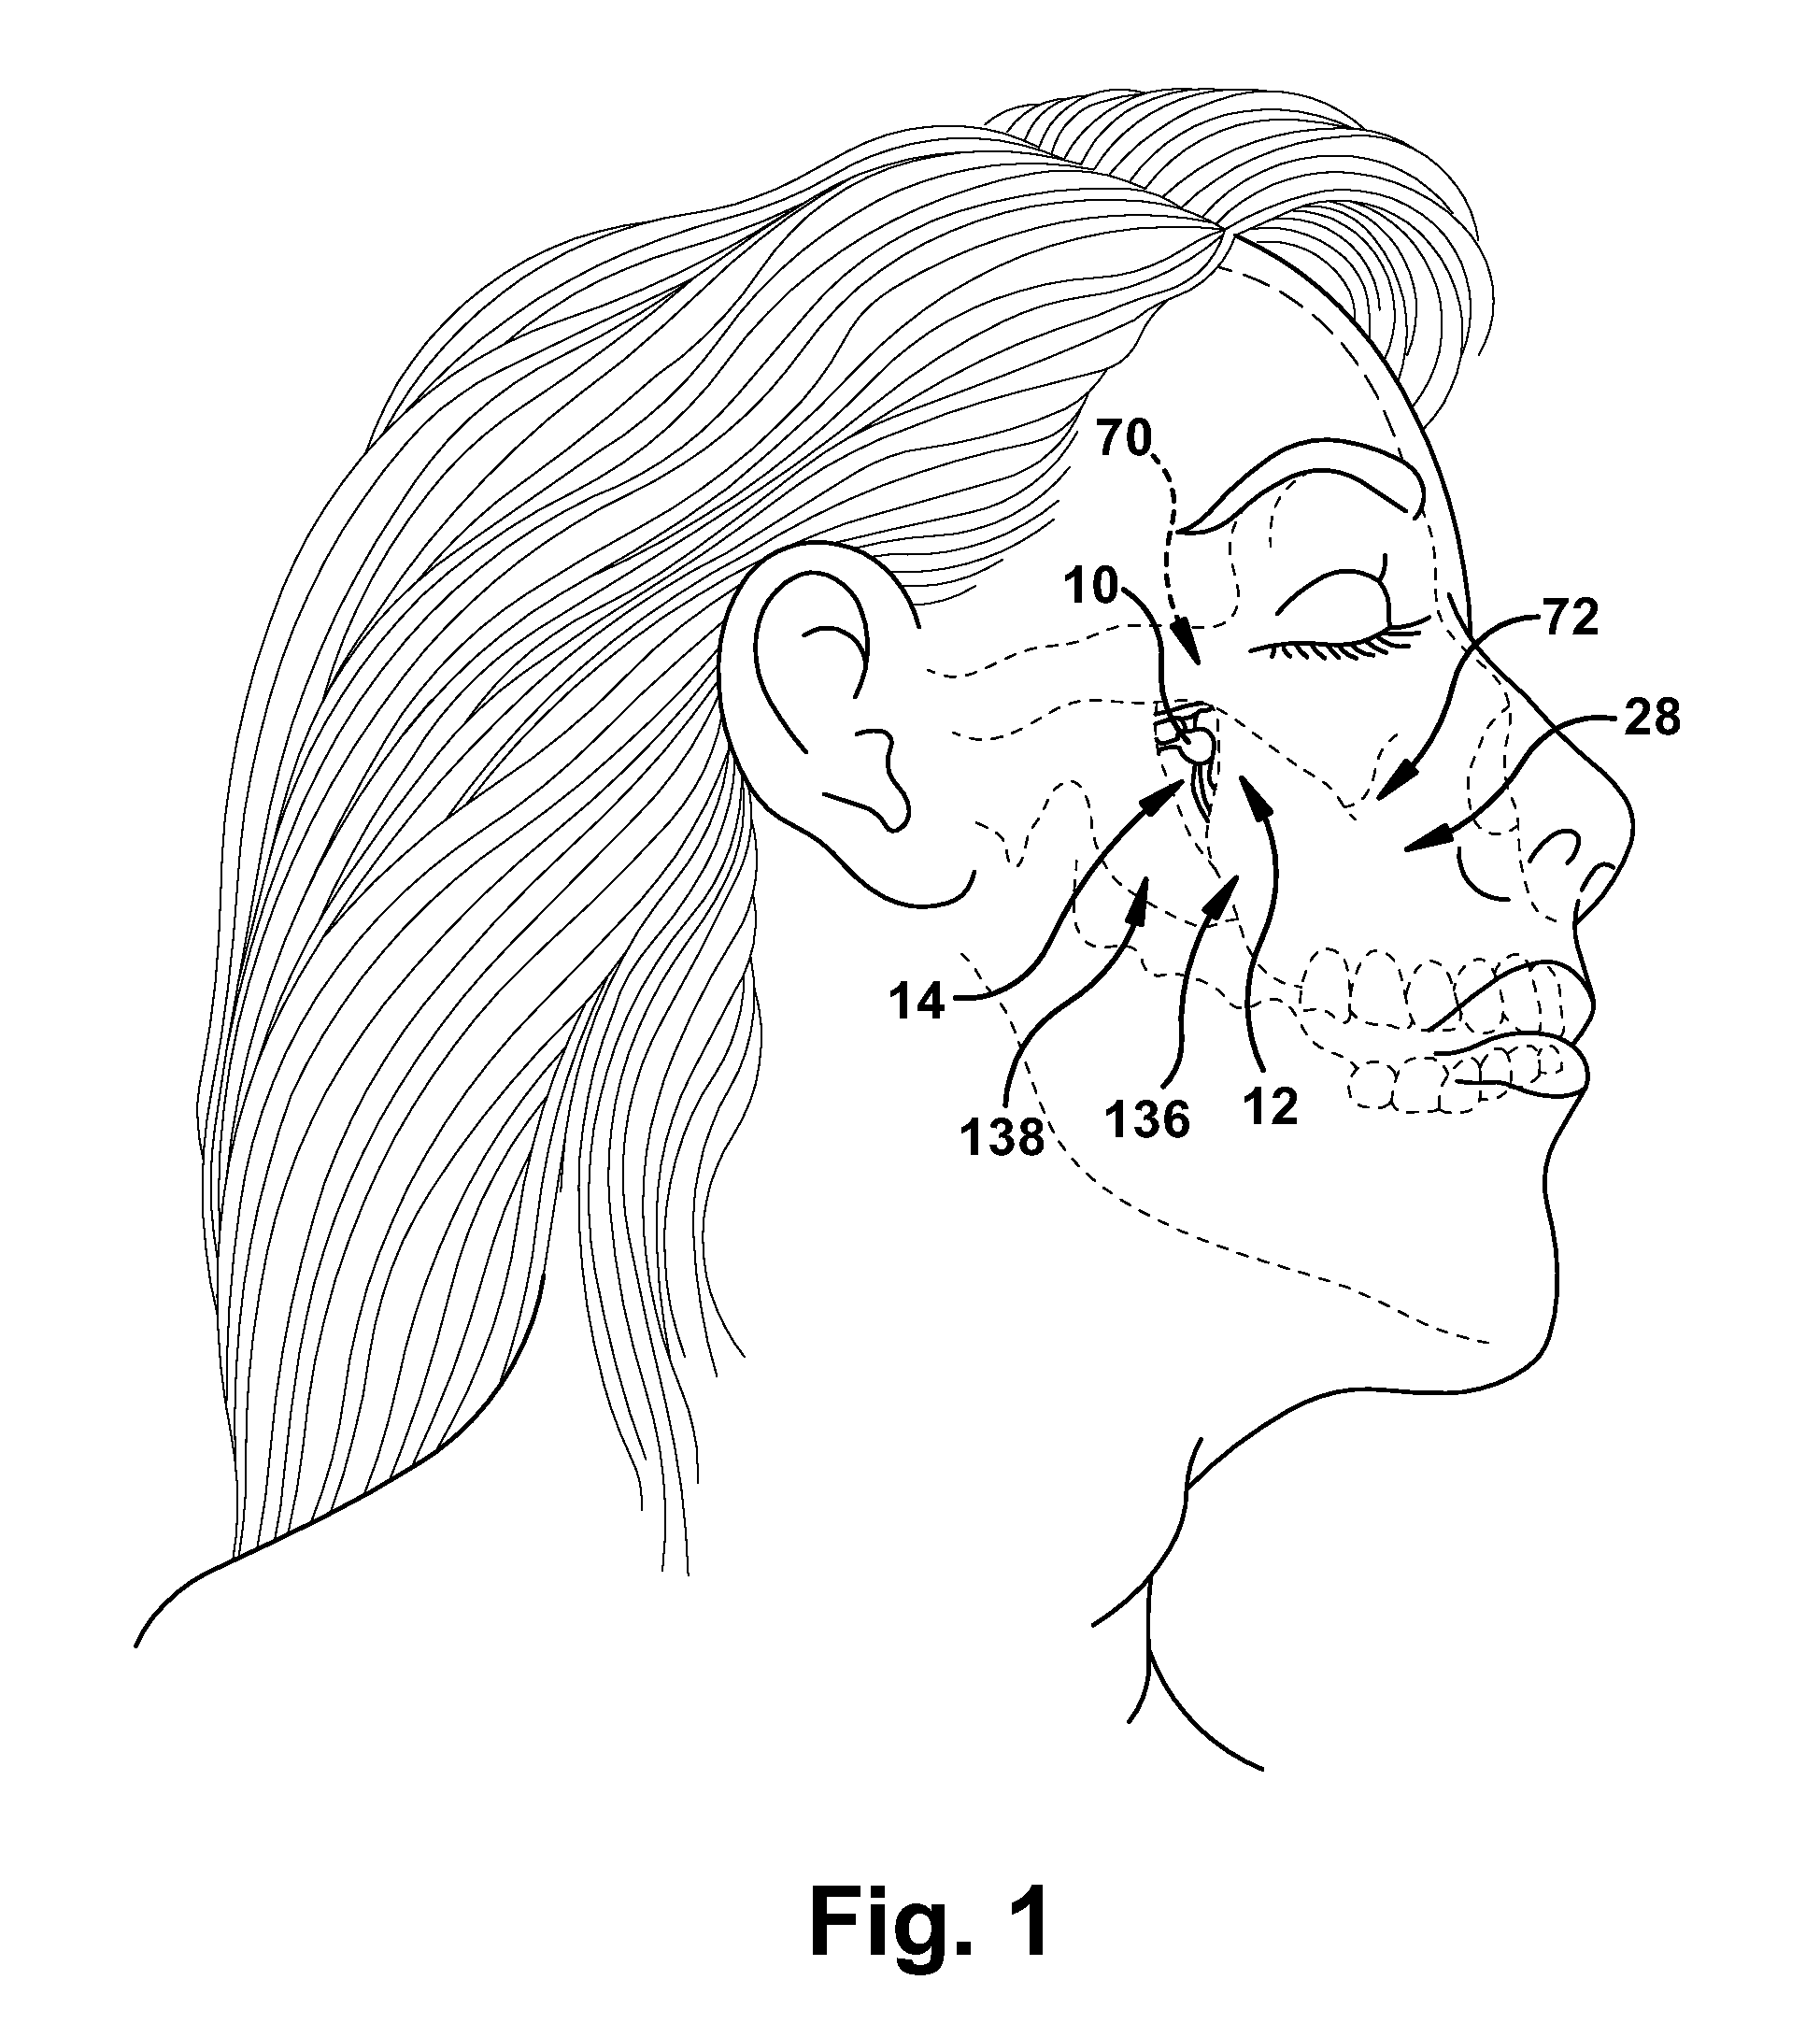 Surgical tools to facilitate delivery of a neurostimulator into the pterygopalatine fossa